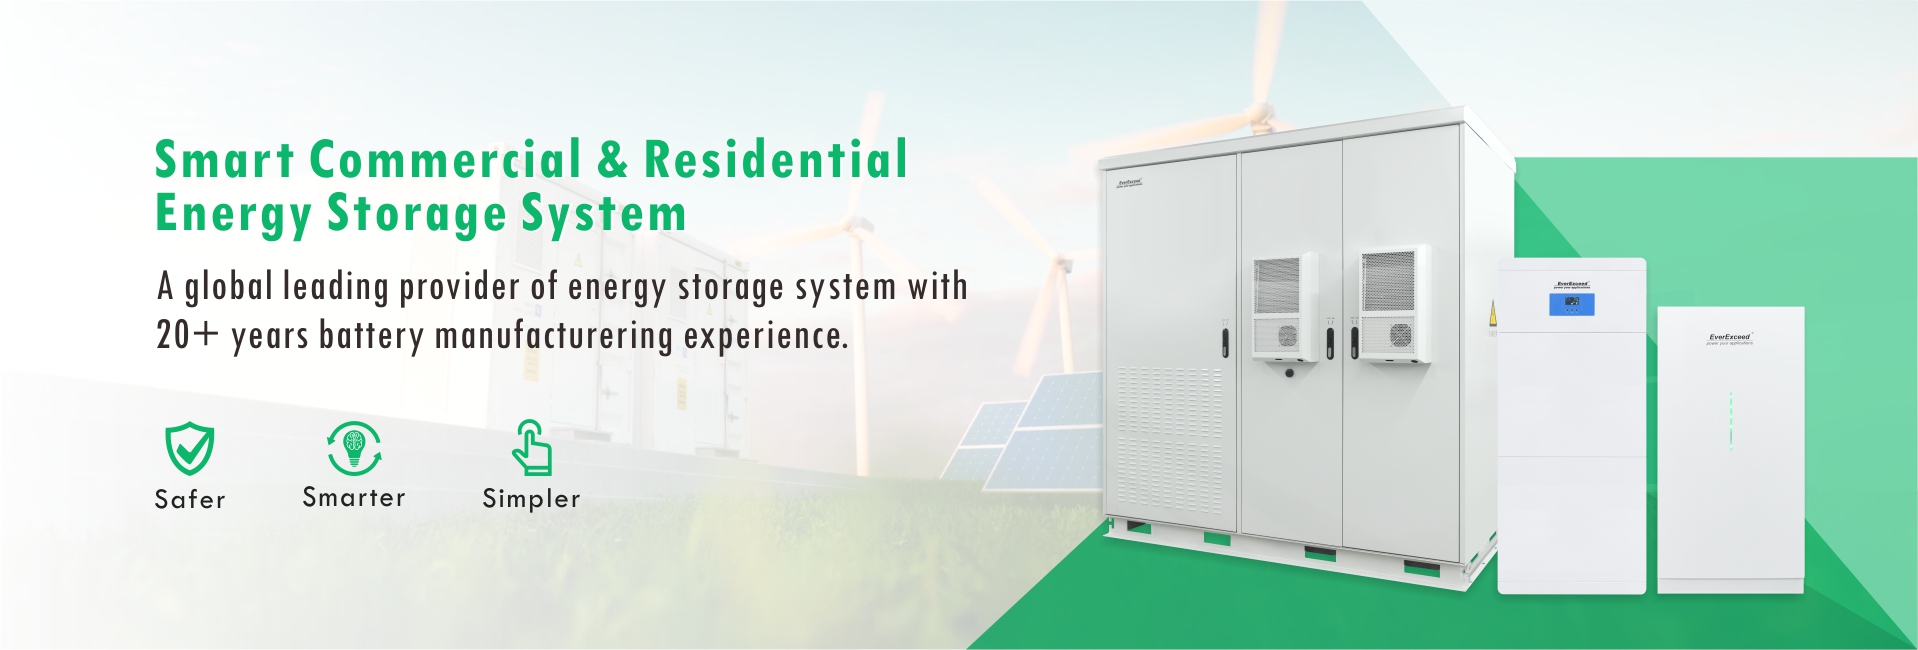 Smart Commercial & Residential Energy Storage System